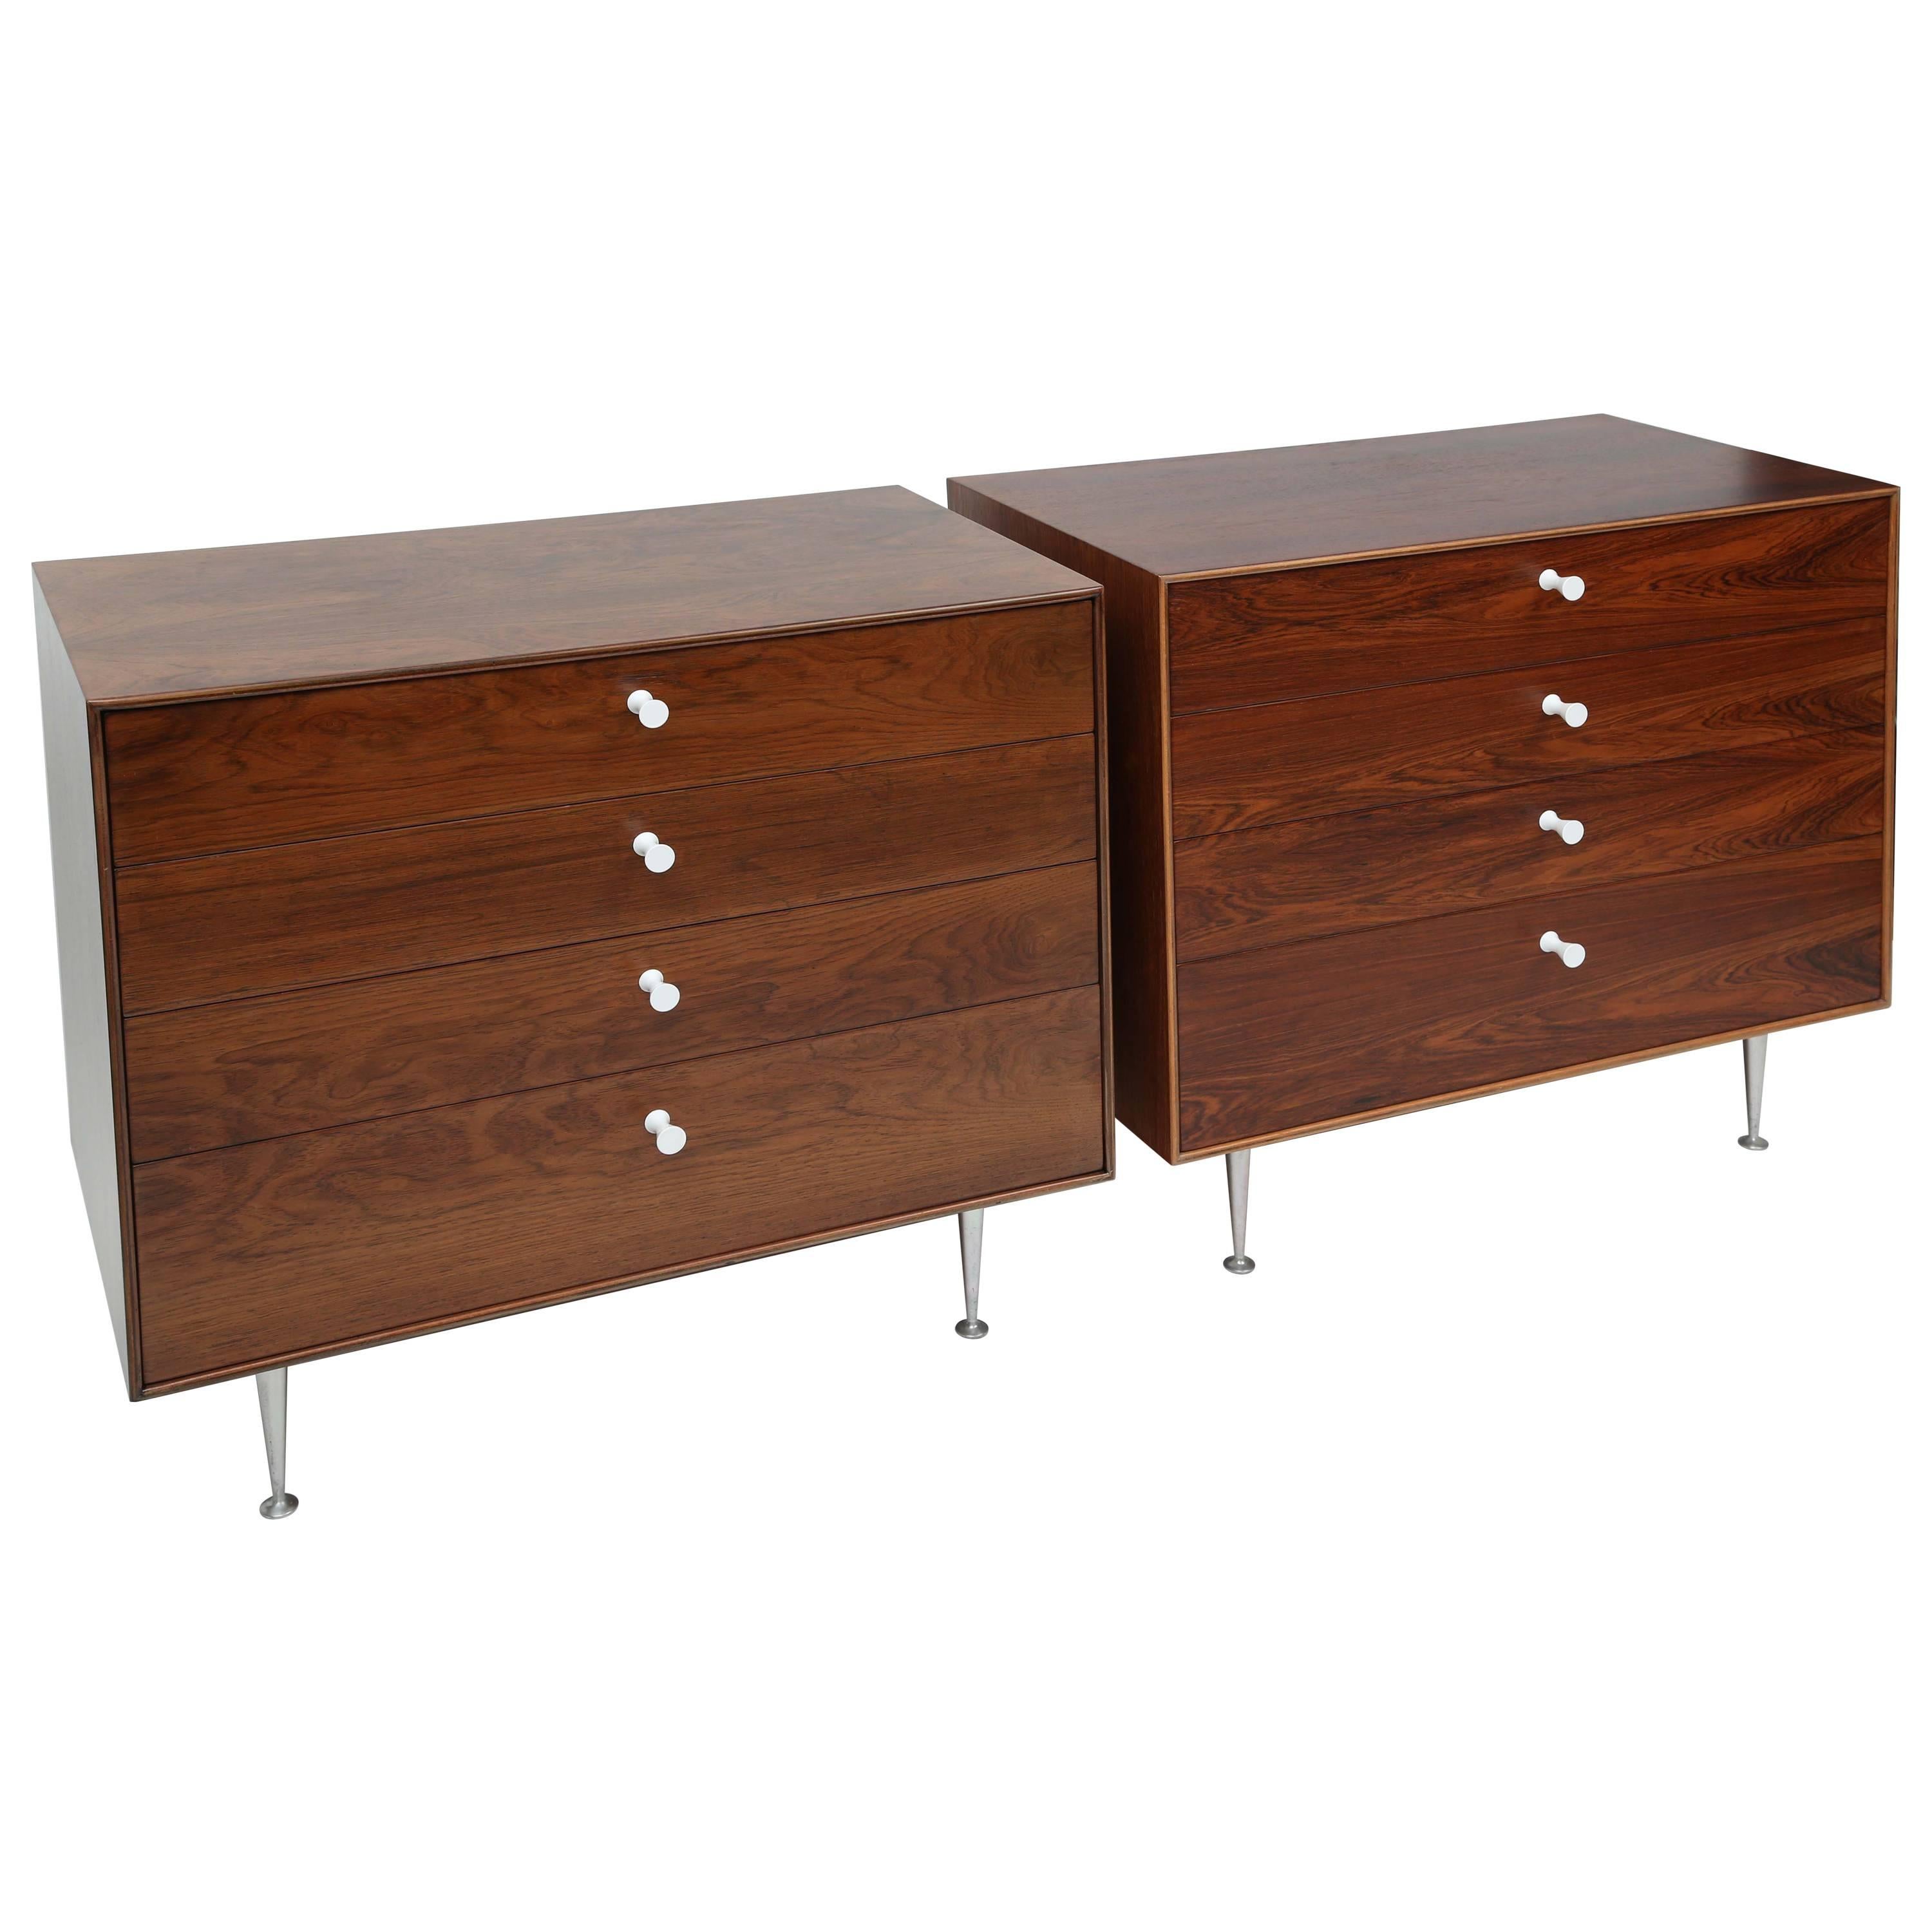 George Nelson Rosewood Thin Edge Dressers